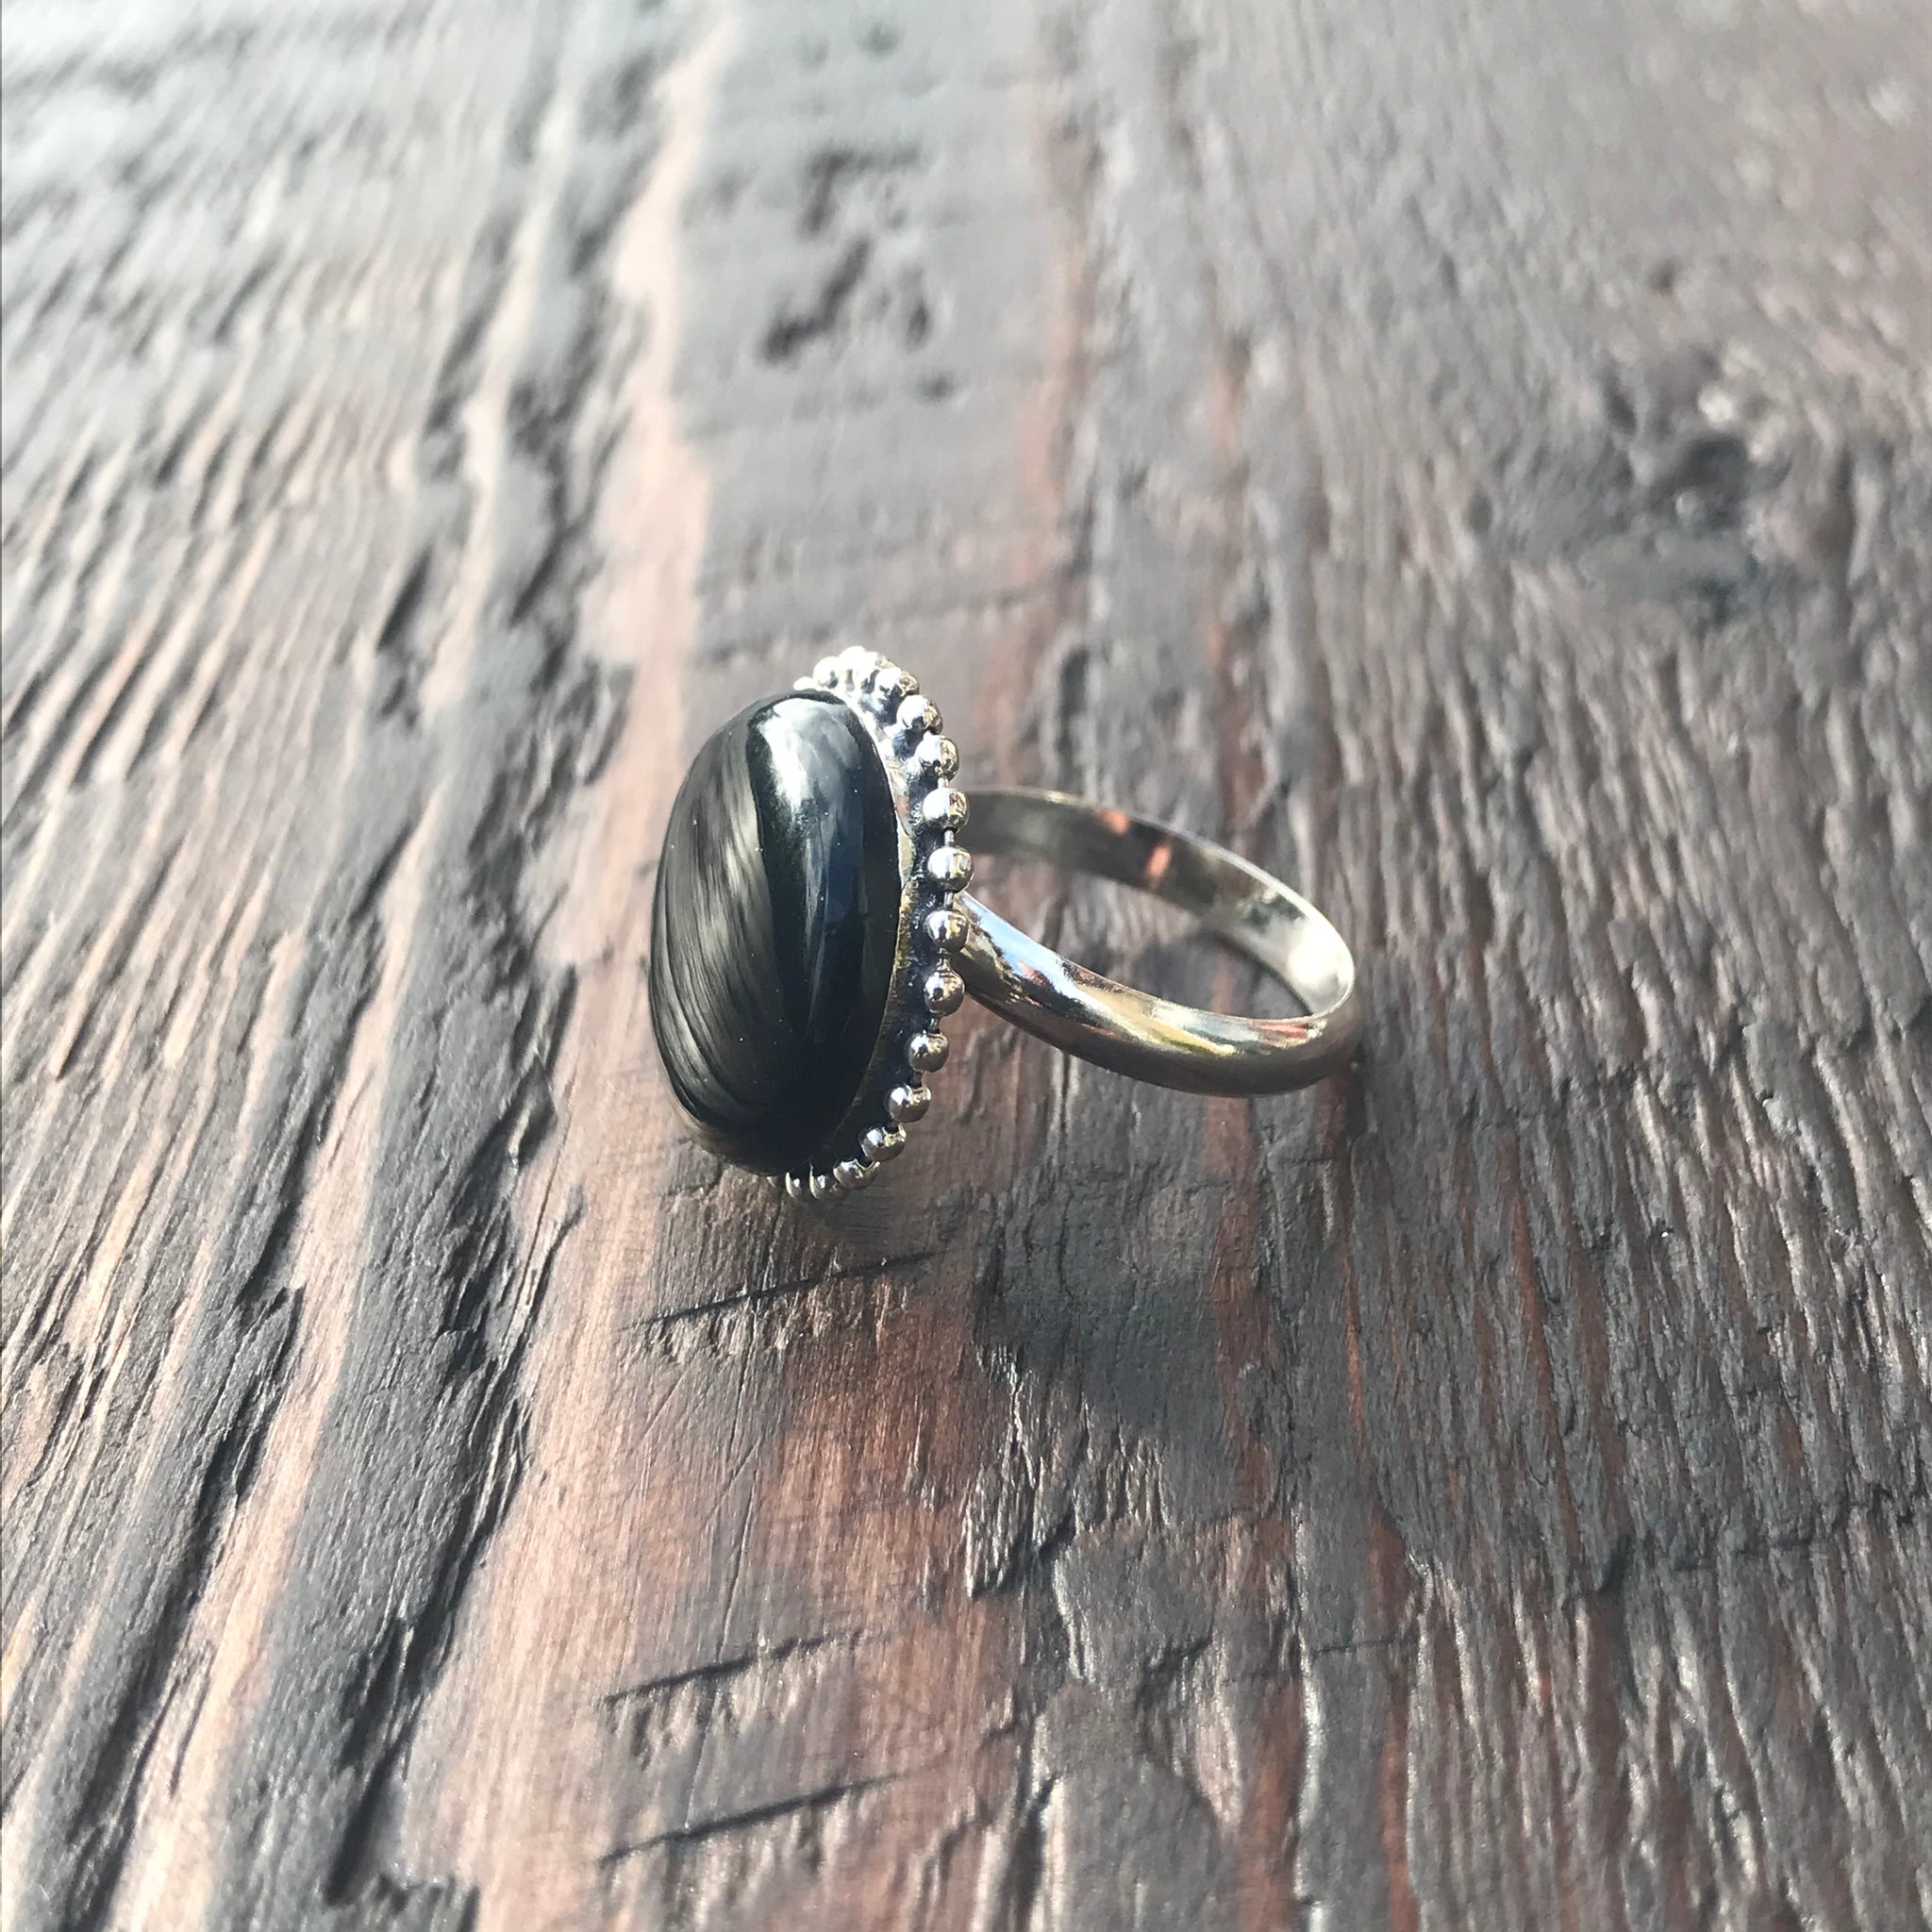 Round Black Sterling Silver Ring With Ethnic Bead - Adjustable